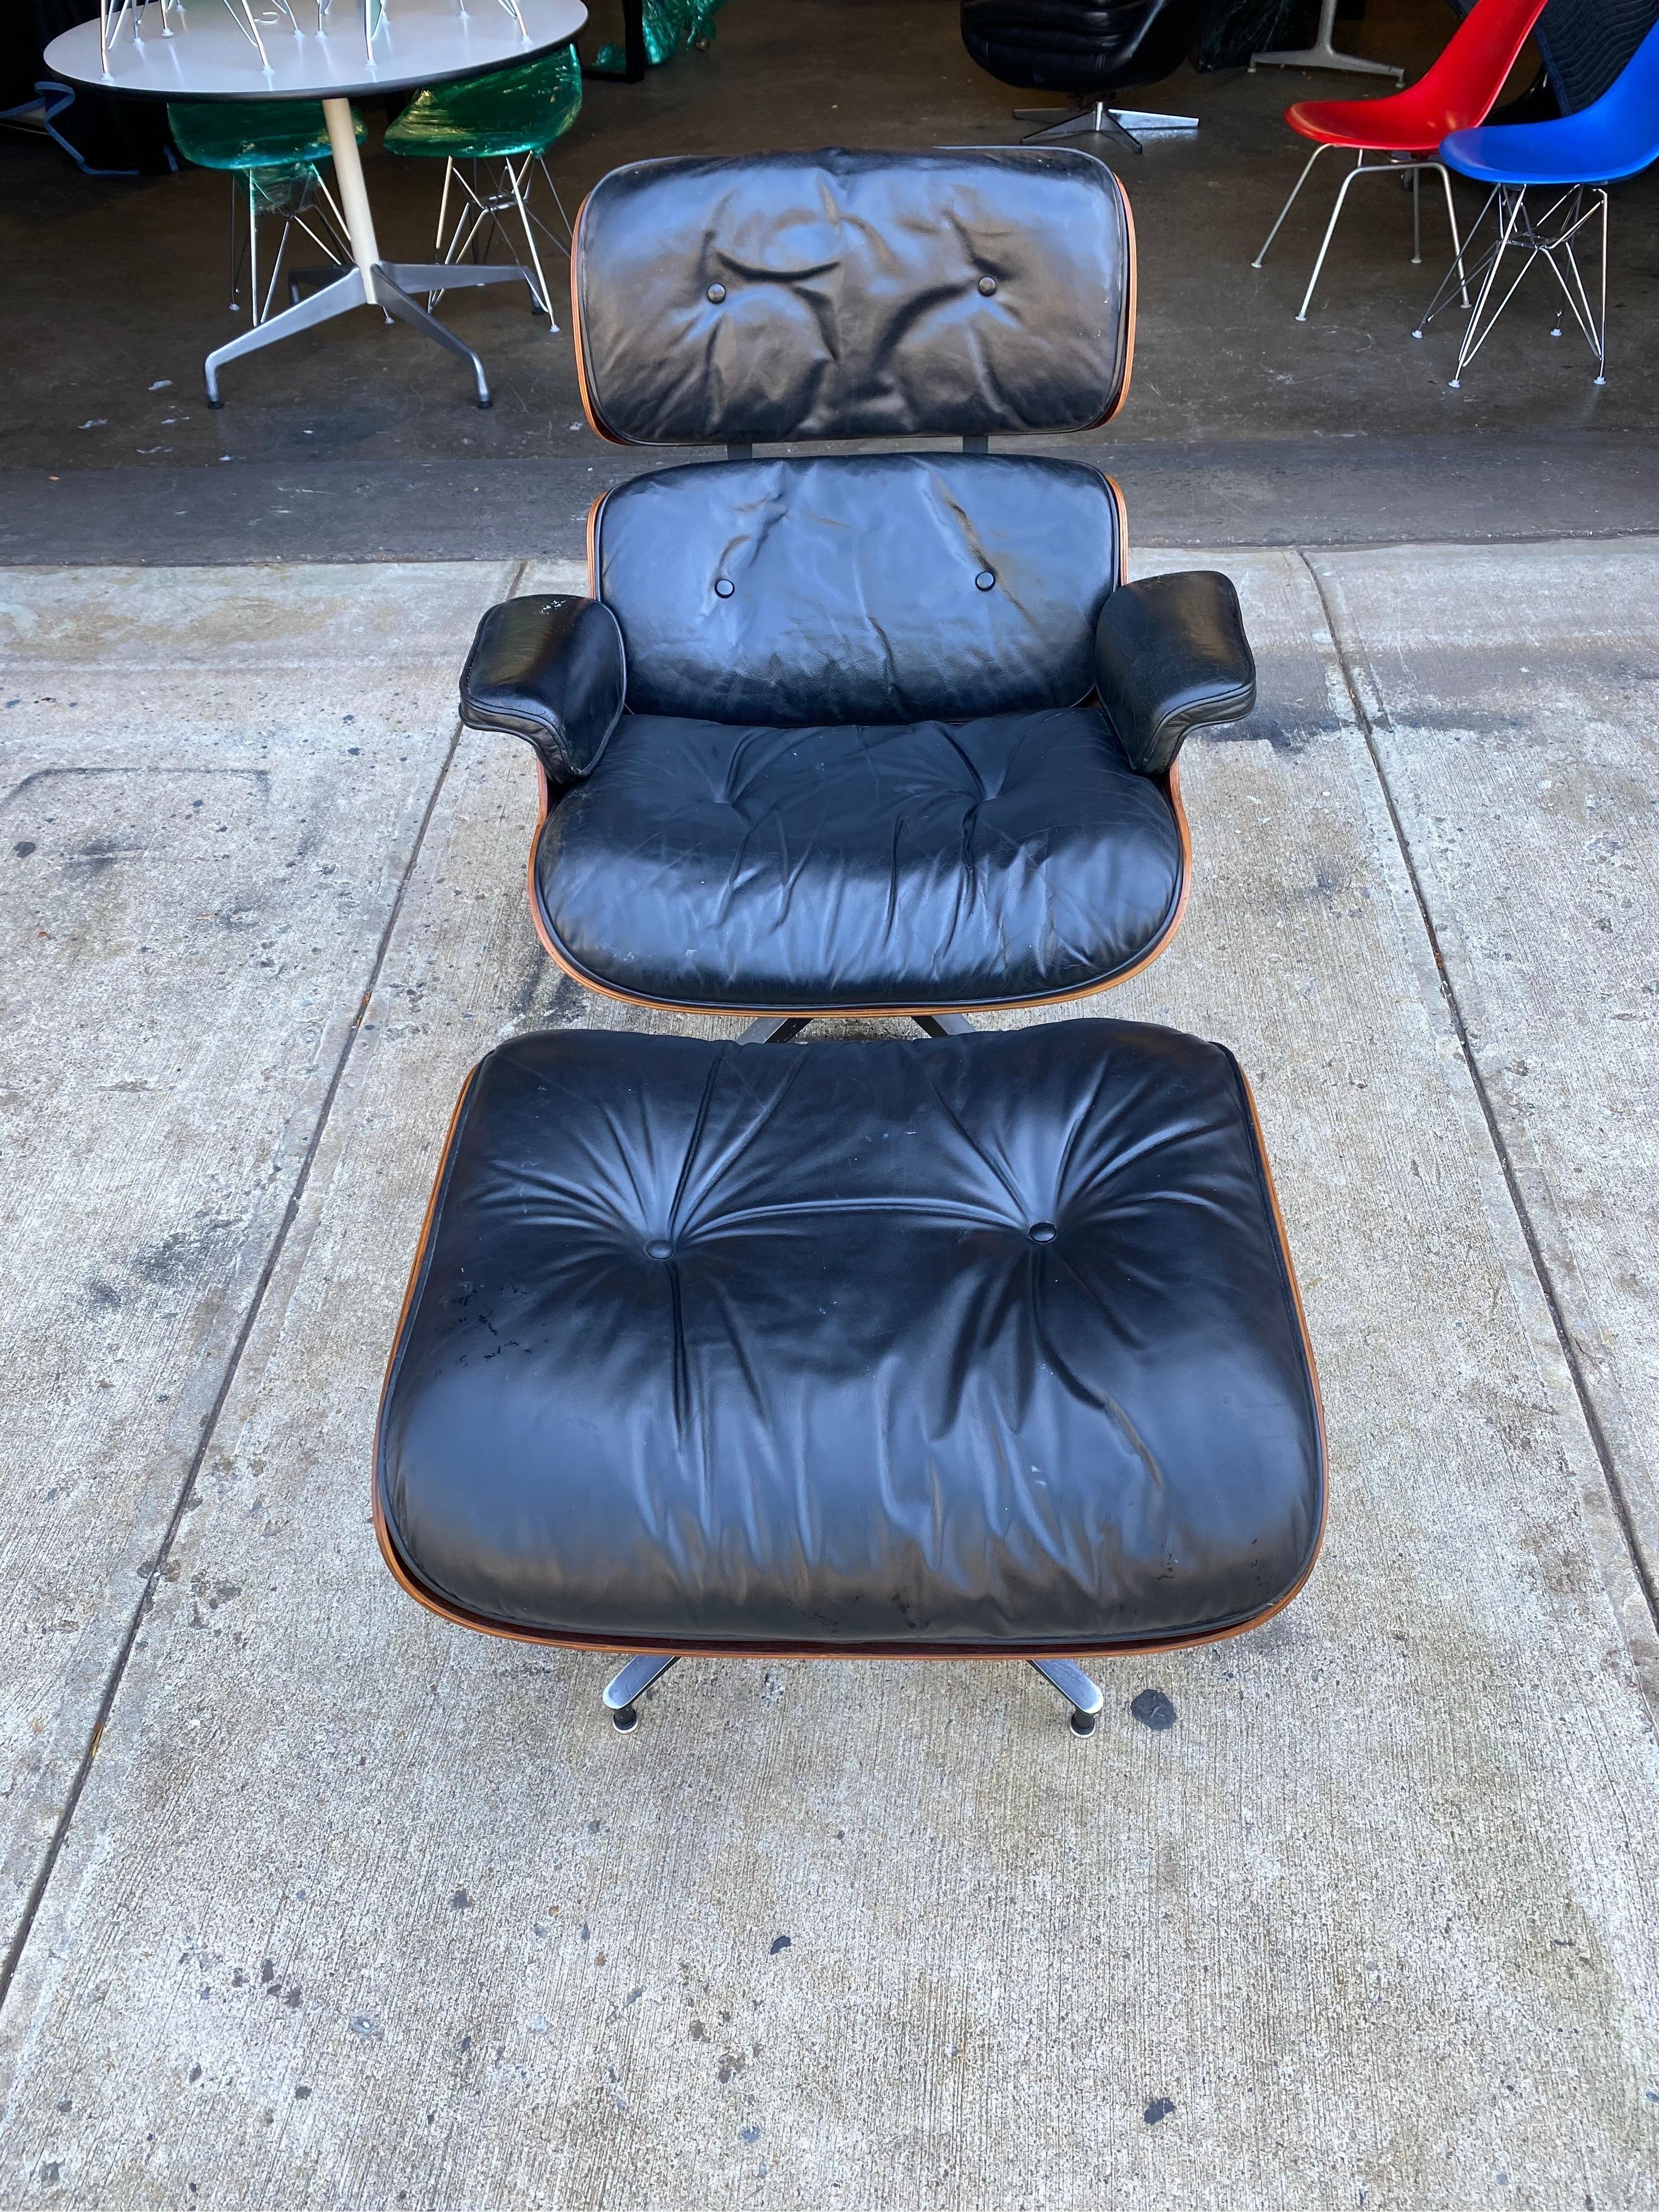 Vintage Eames lounge chair and ottoman set, circa 1960s. Signed and guaranteed authentic. Original al leather with down feather cushions. All parts intact. Replaced seat rubber shock mounts ($500 value). Wood refinished and the color is spectacular.